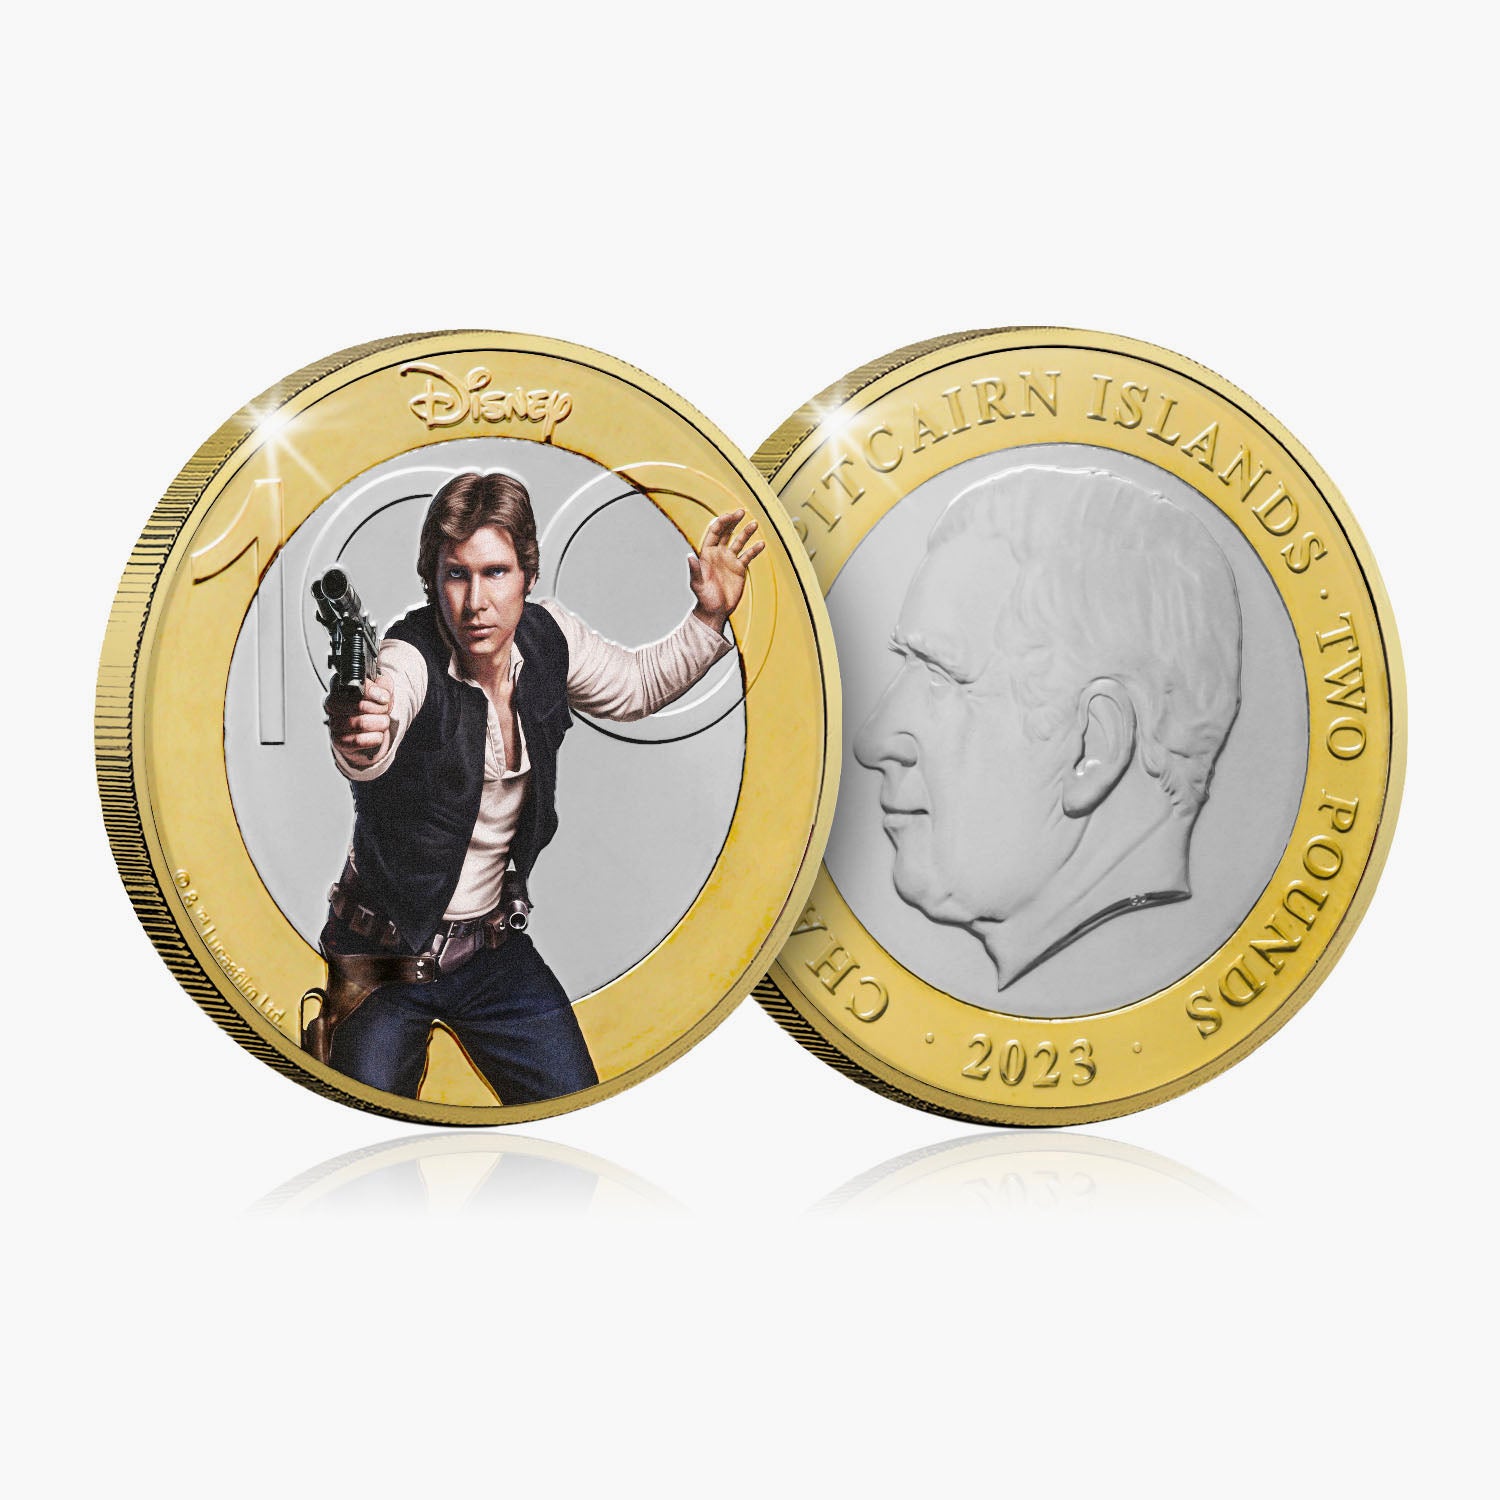 The Official Star Wars 2023 Colour Coin Set